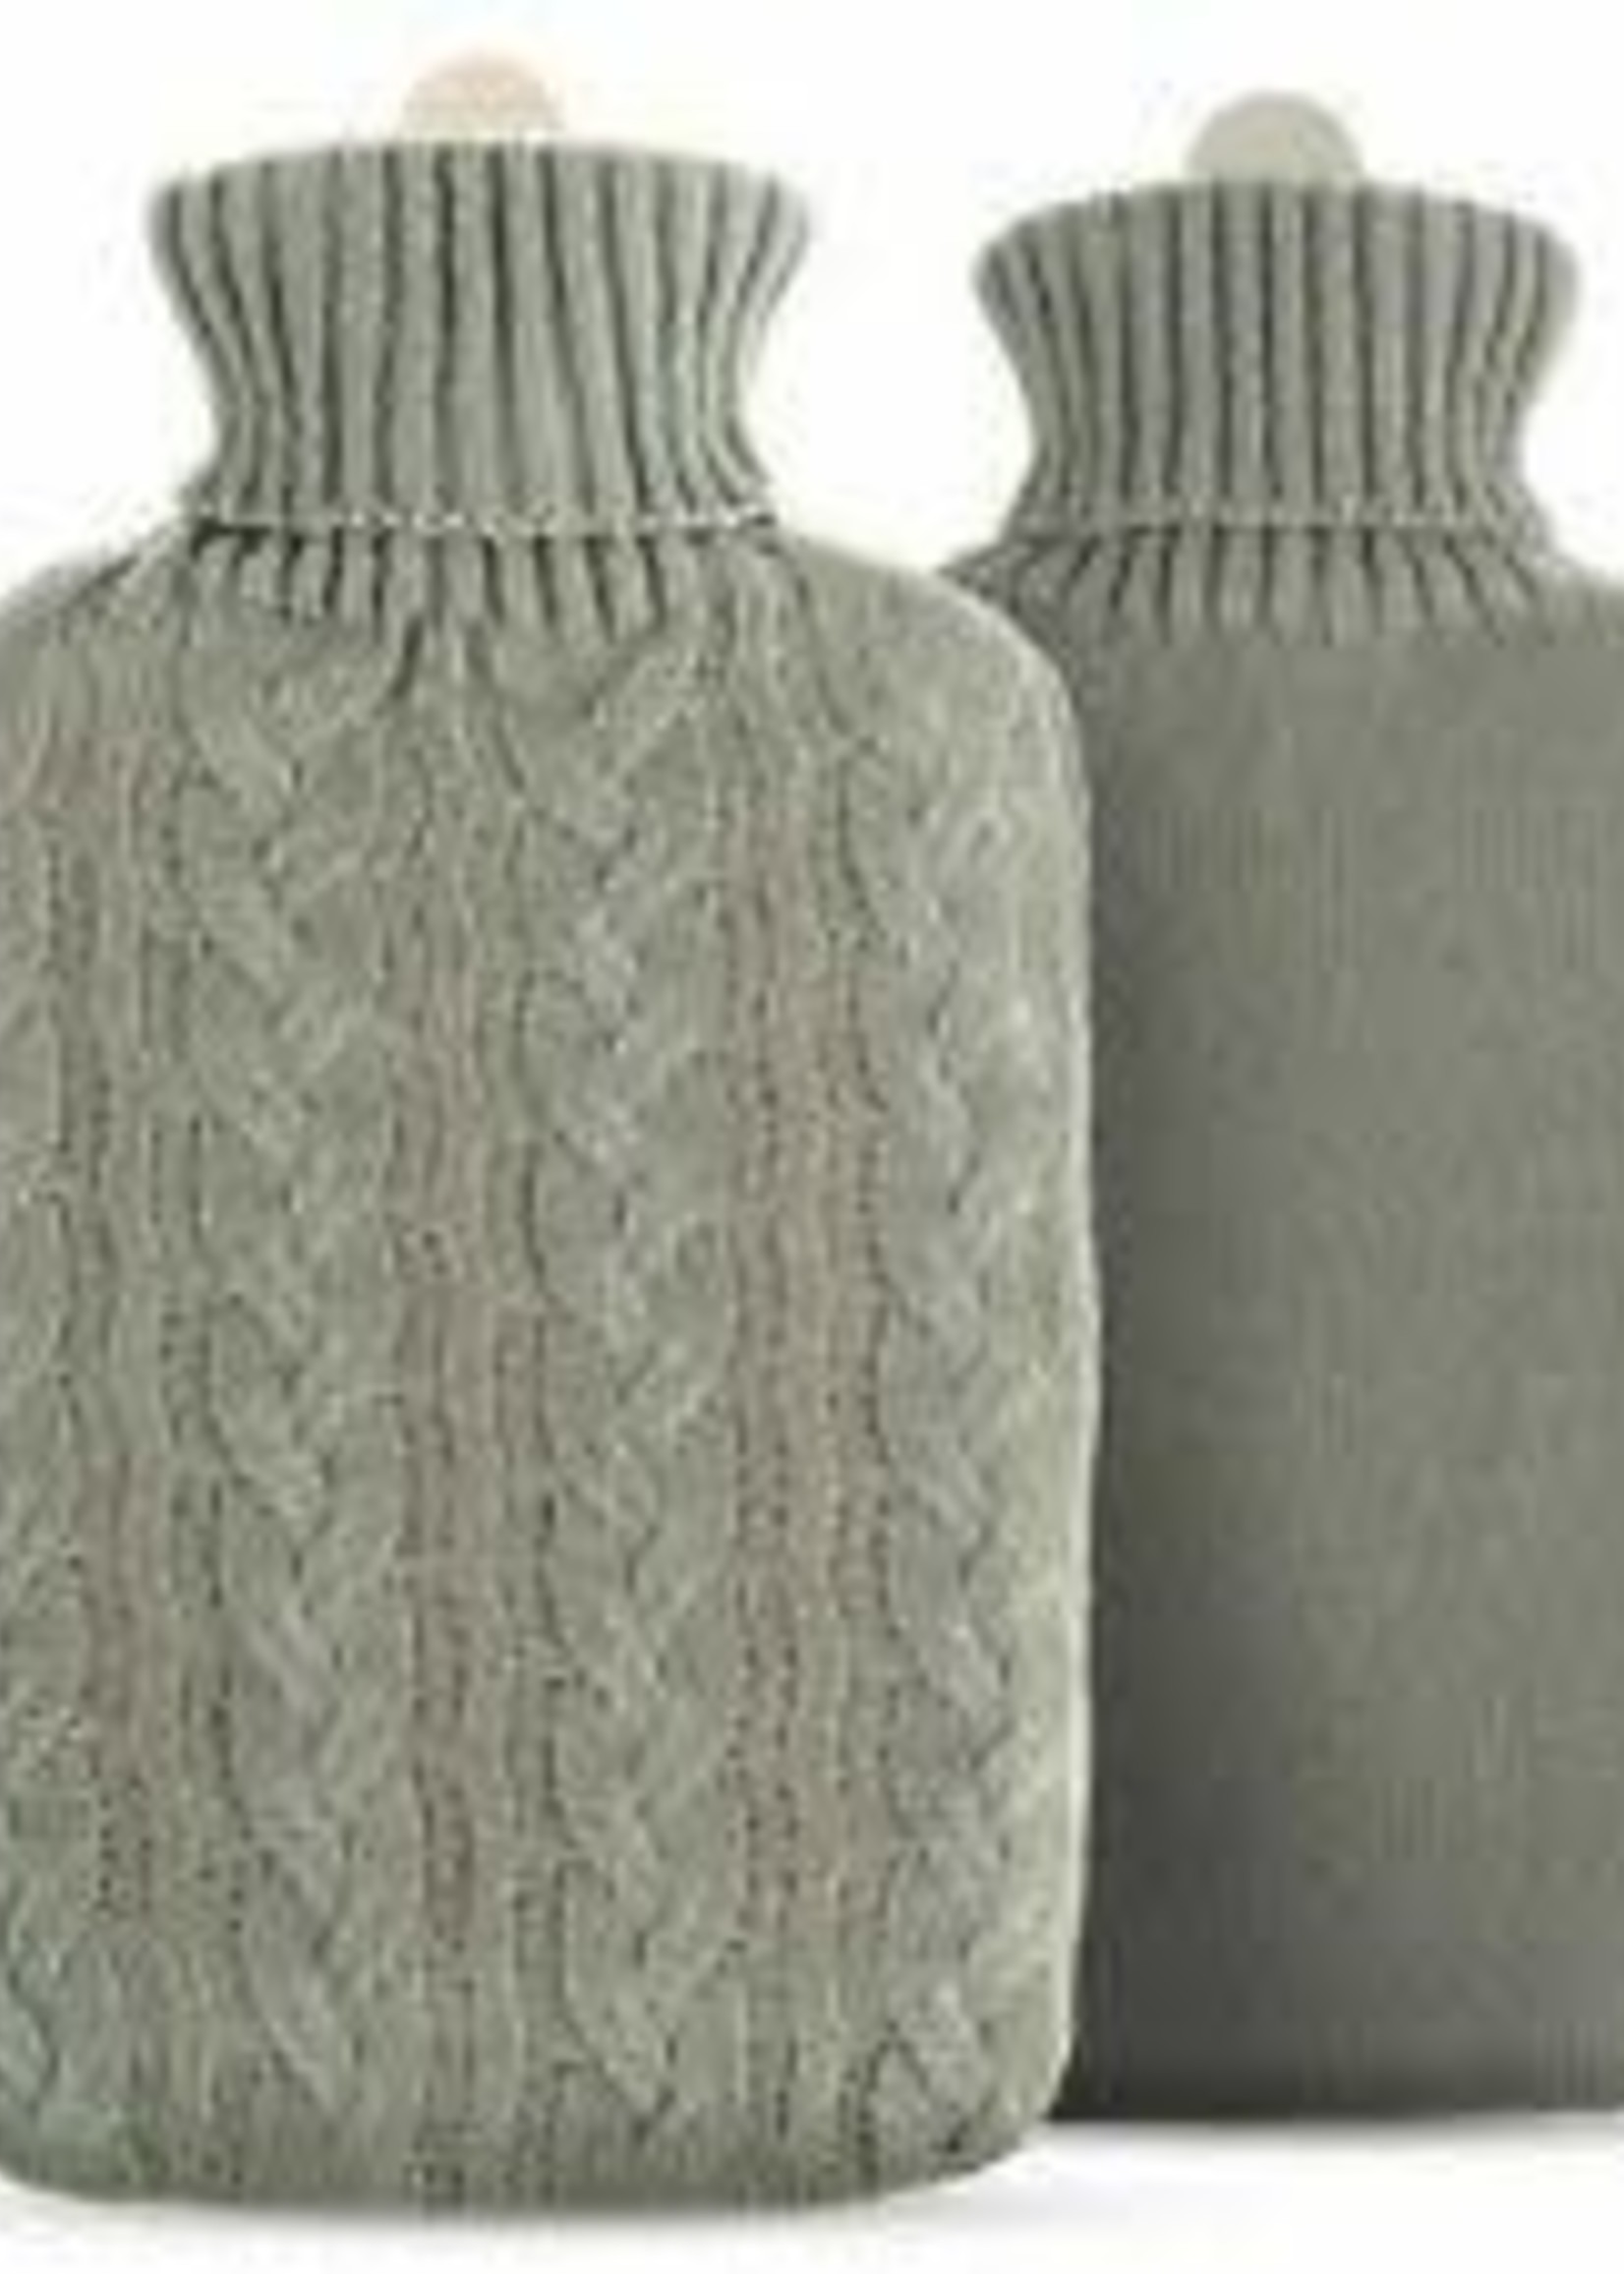 Hearth and Home Hot water bottle knit cover